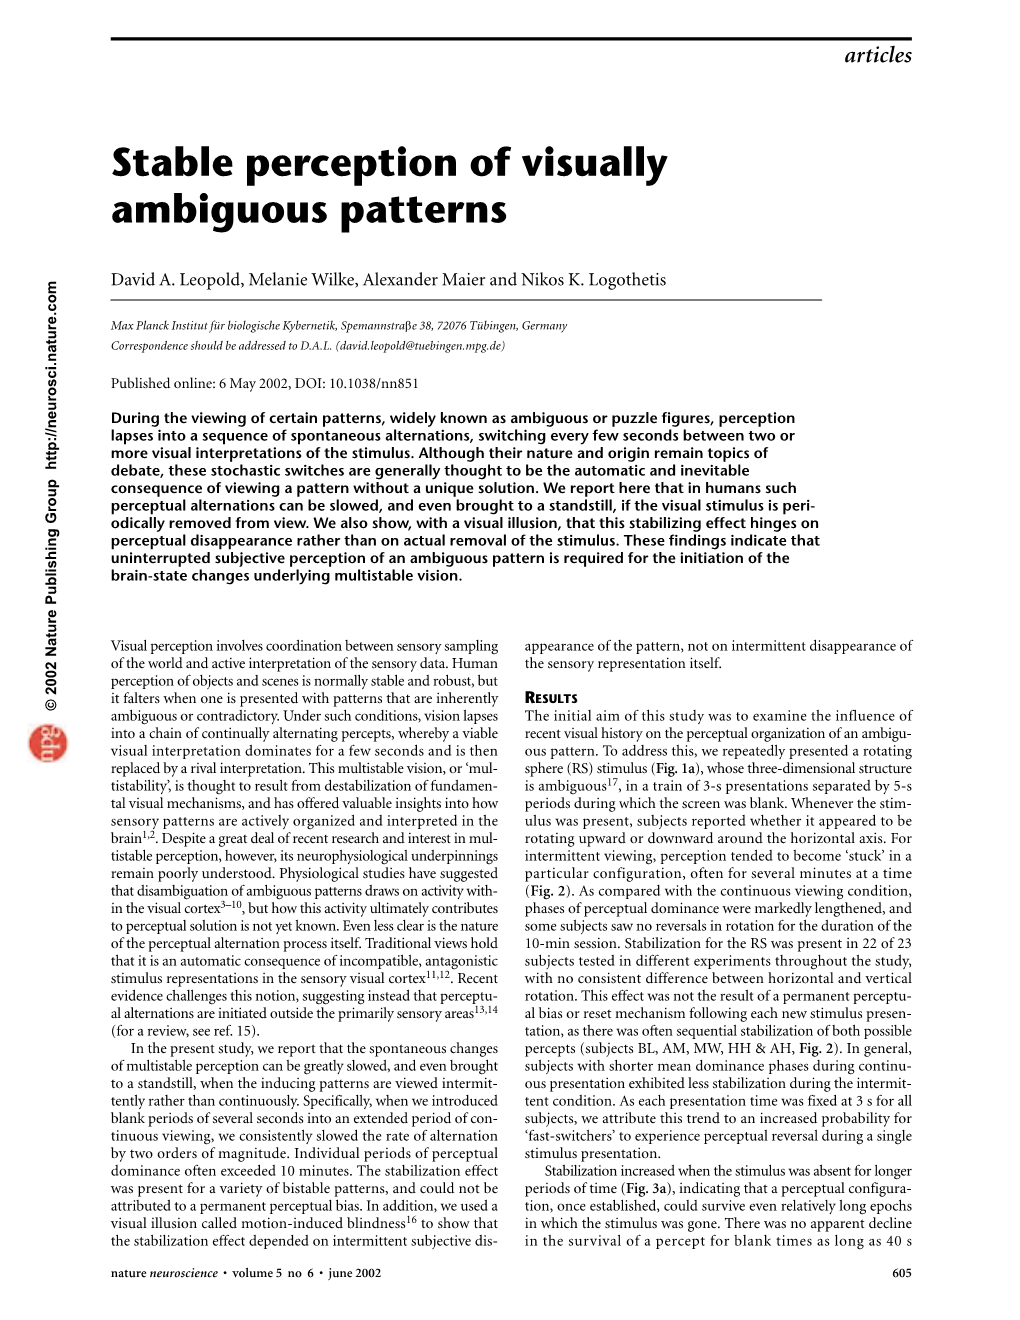 Leopold (2002) Stable Perception of Visually Ambiguous Patterns